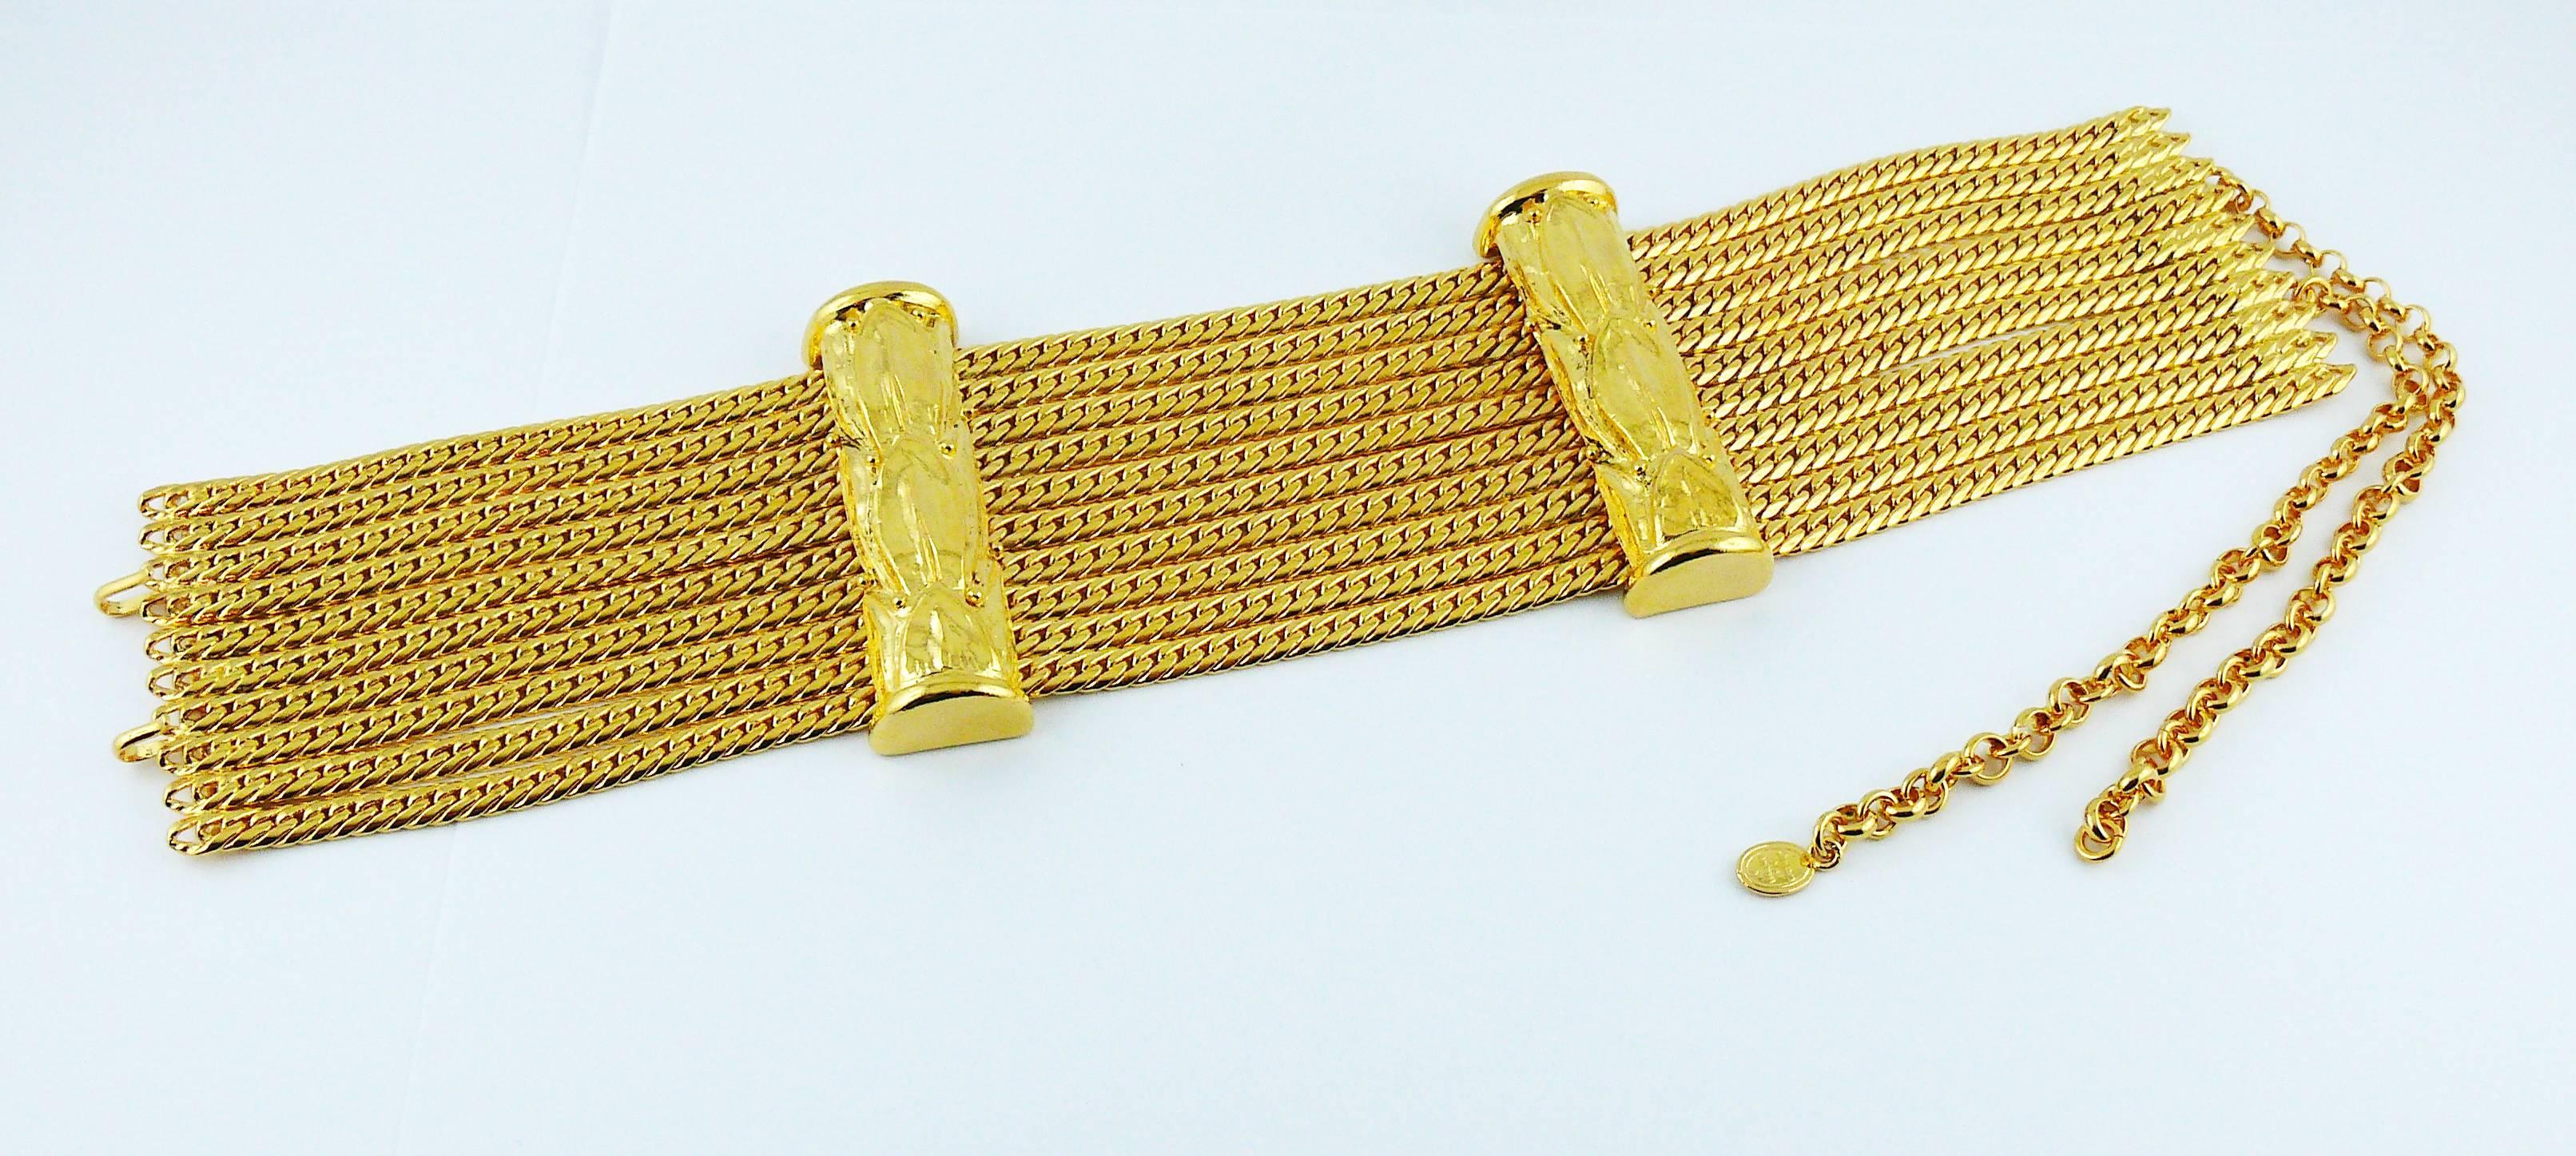 CHRISTIAN DIOR Boutique gorgeous vintage gold toned choker necklace consisting of ten chains and laurel bar details at front.

Hook clasp.
Extension chain.

Marked CHRISTIAN DIOR Boutique.

Indicative measurements : total max. length approx. 41 cm